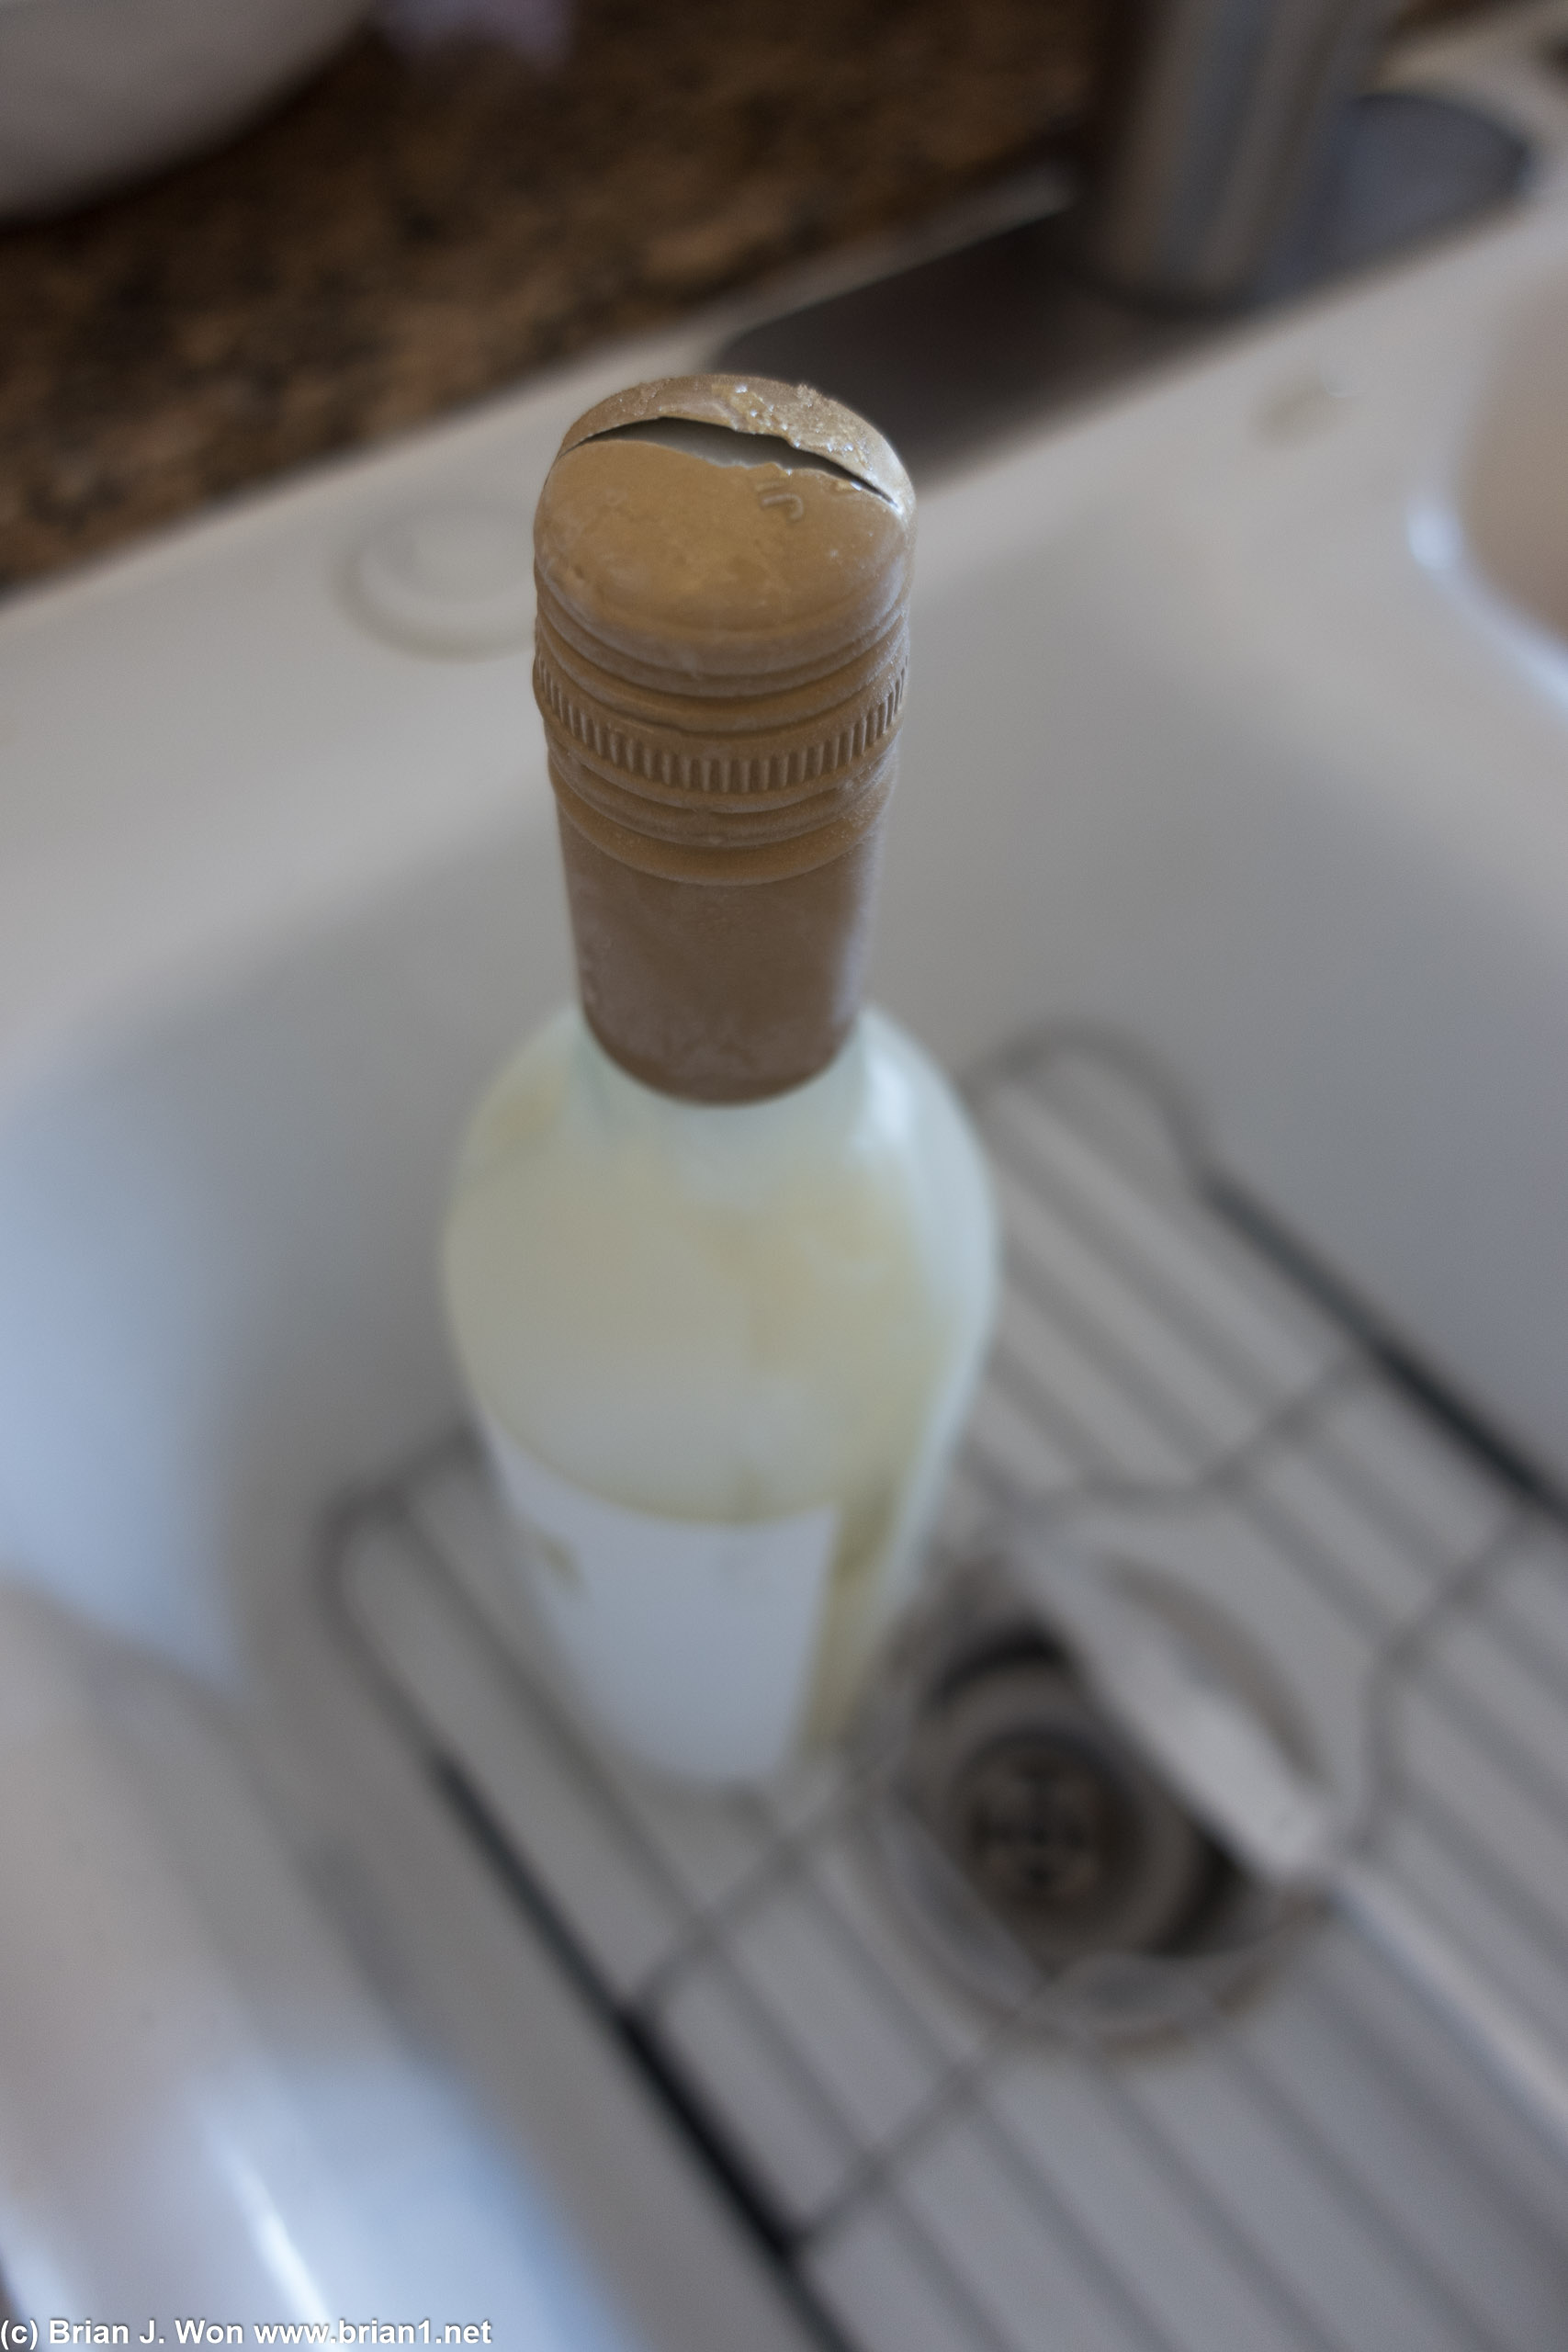 Some left a bottle of Justin sauvignon blanc in the freezer too long.